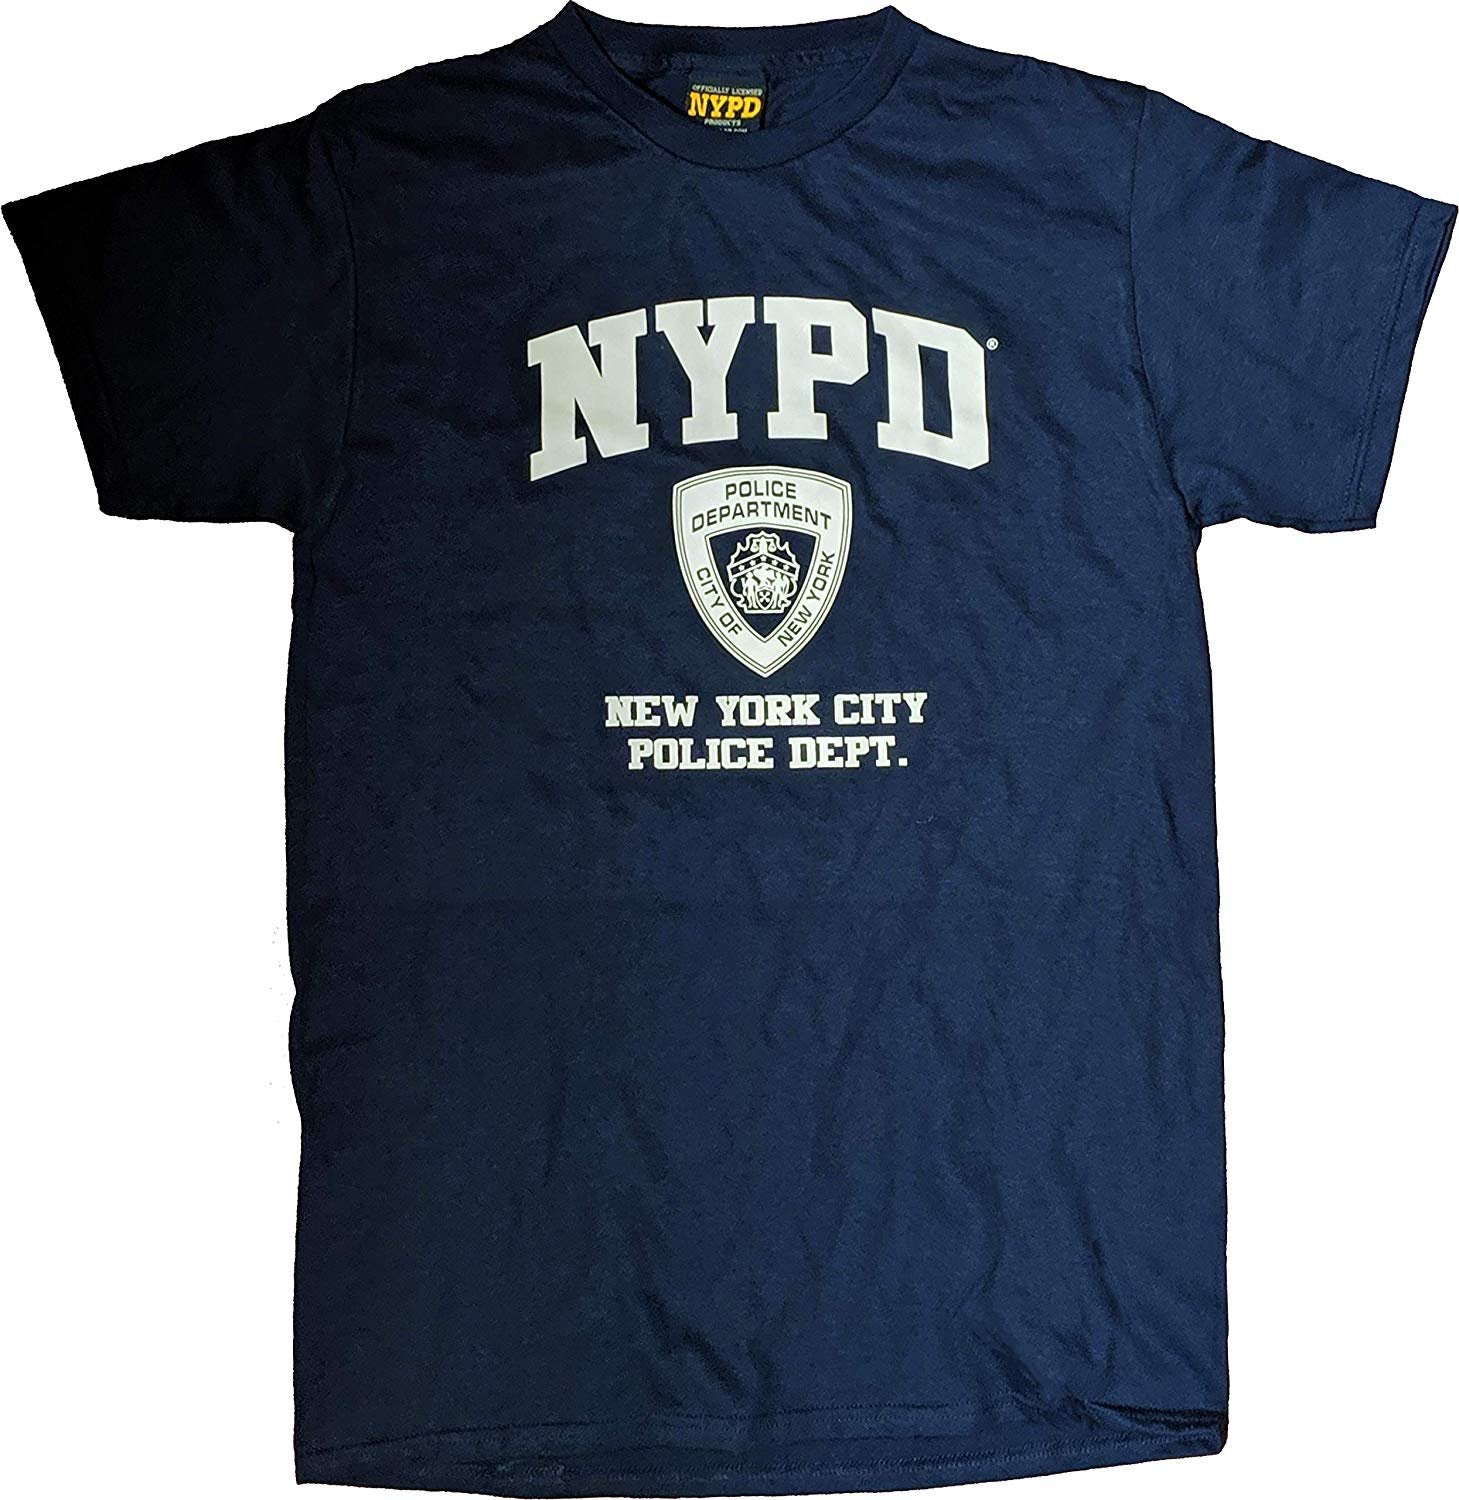 NYPD Men's T-Shirt Officially Licensed (Navy Blue / White)